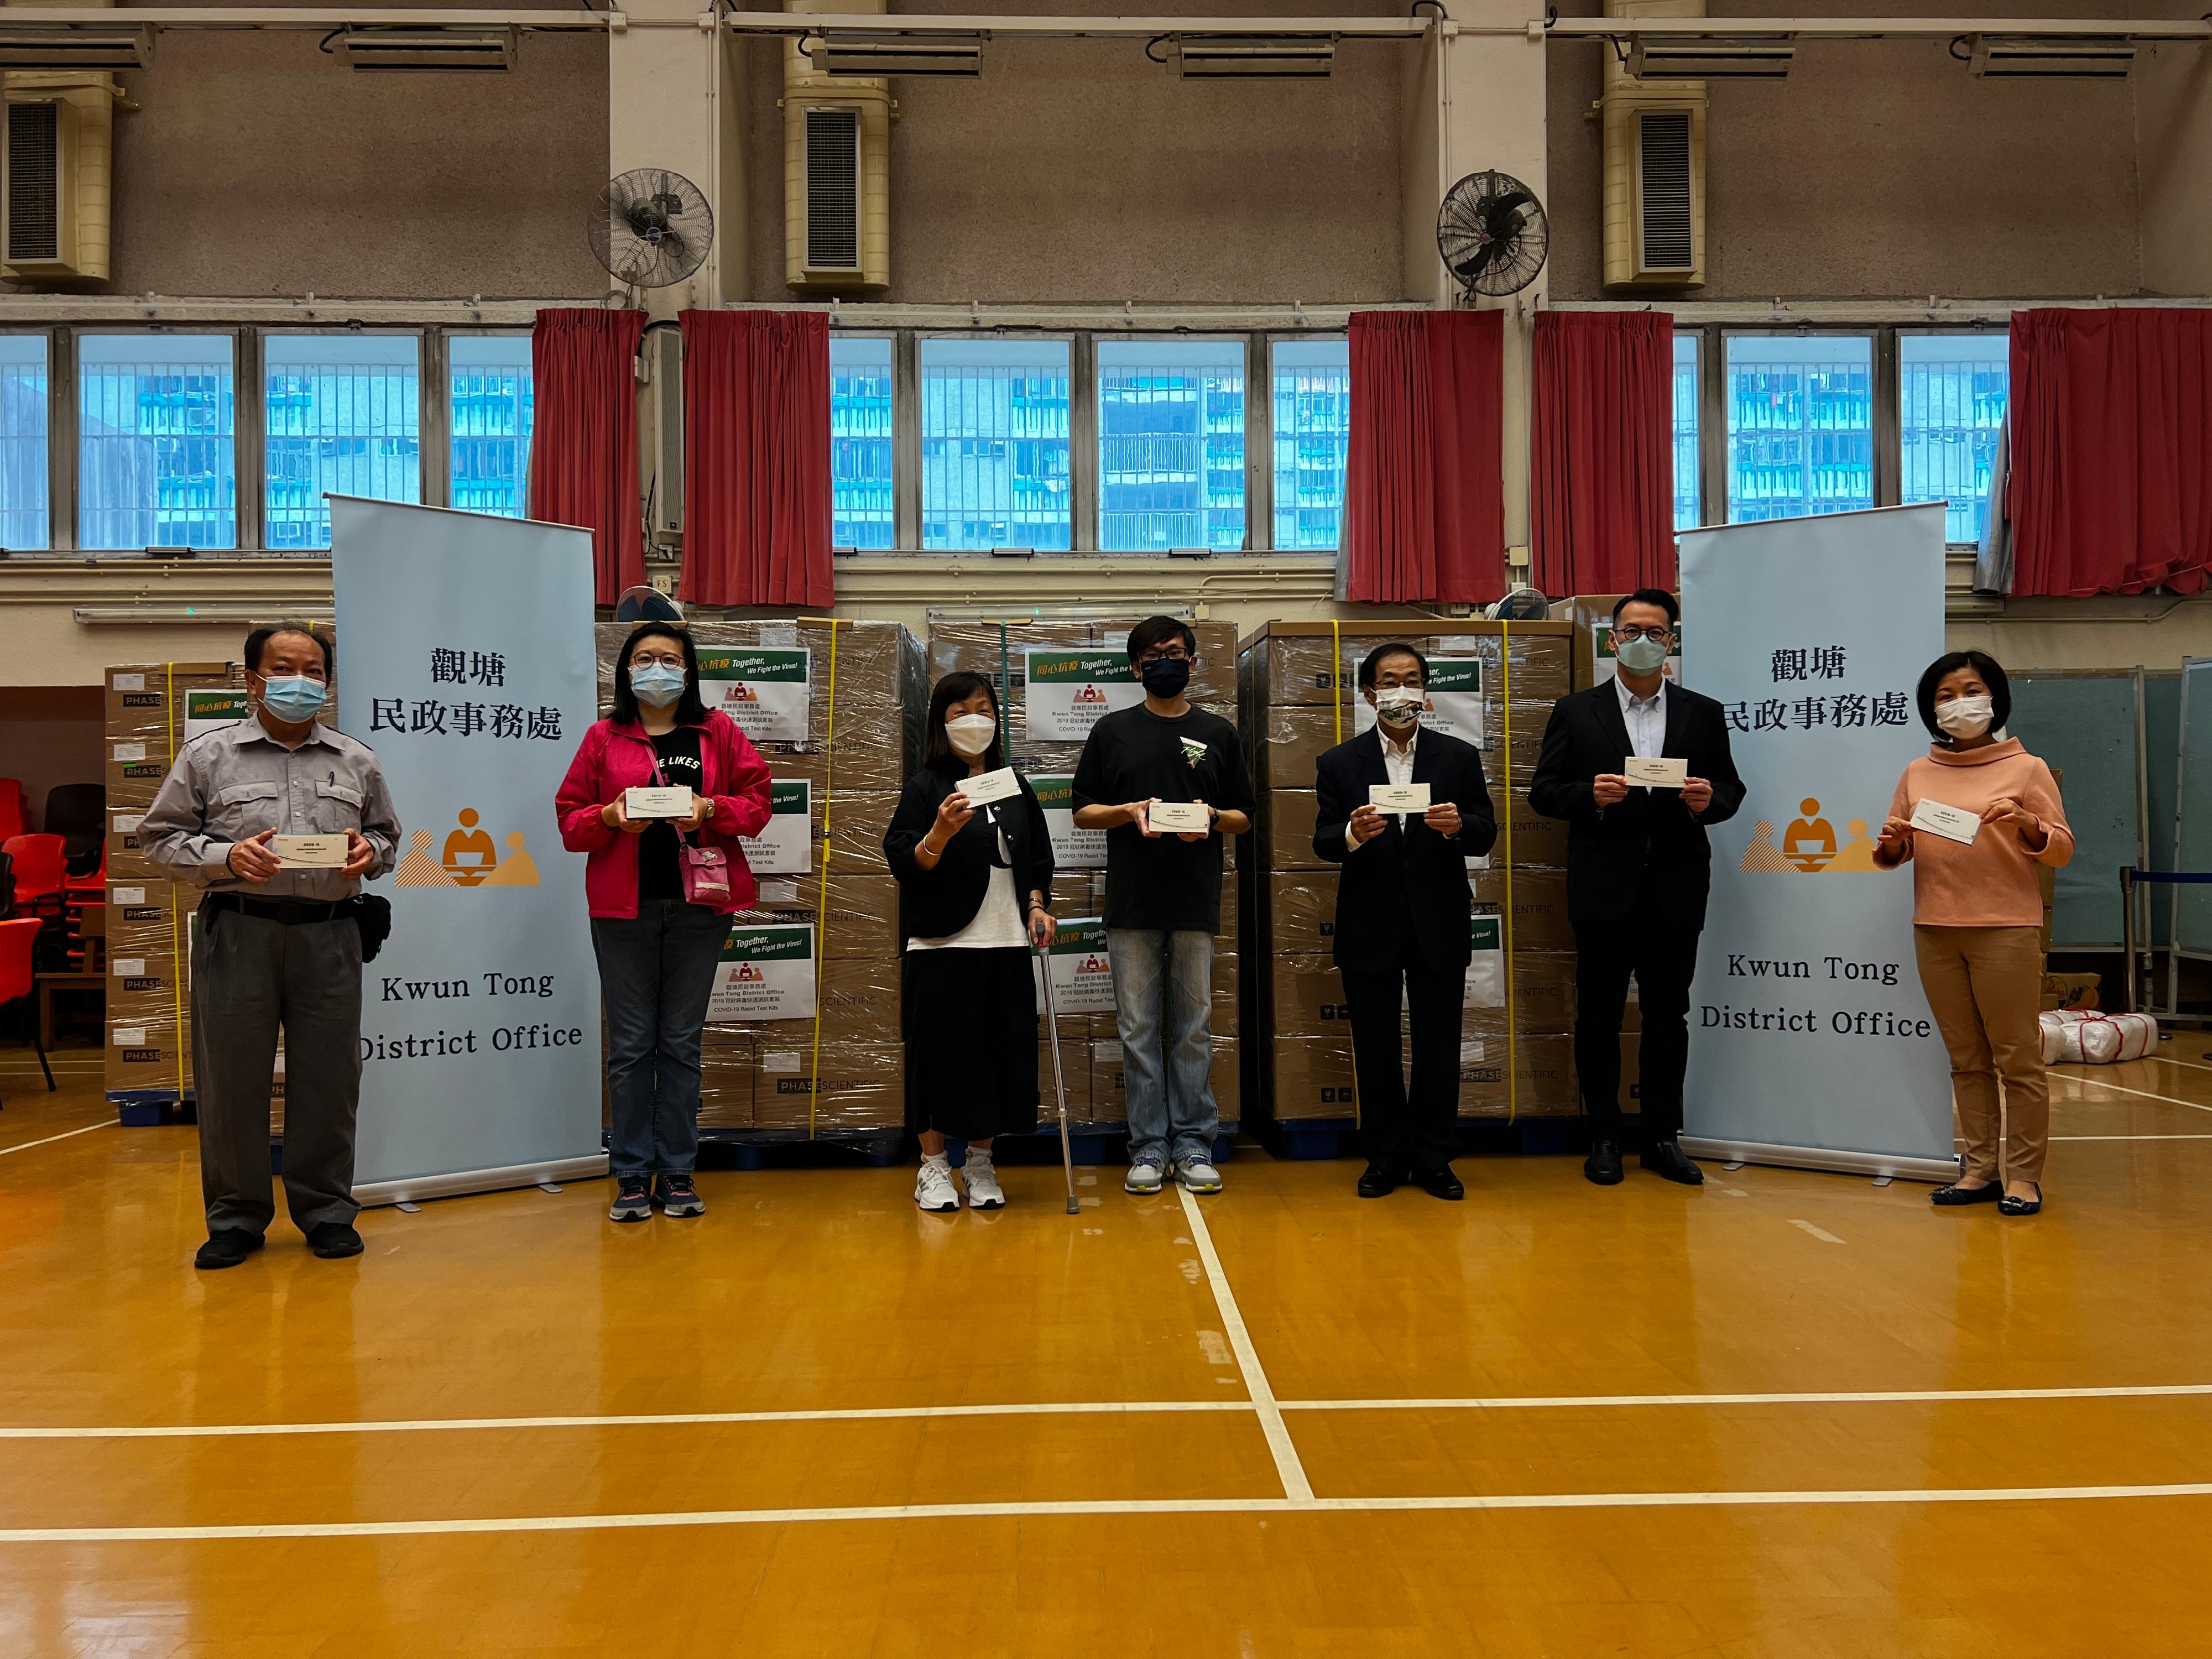 The Kwun Tong District Office today (March 16) distributed COVID-19 rapid test kits to households, cleansing workers and property management staff living and working in Shun Tin Estate for voluntary testing through the property management company.